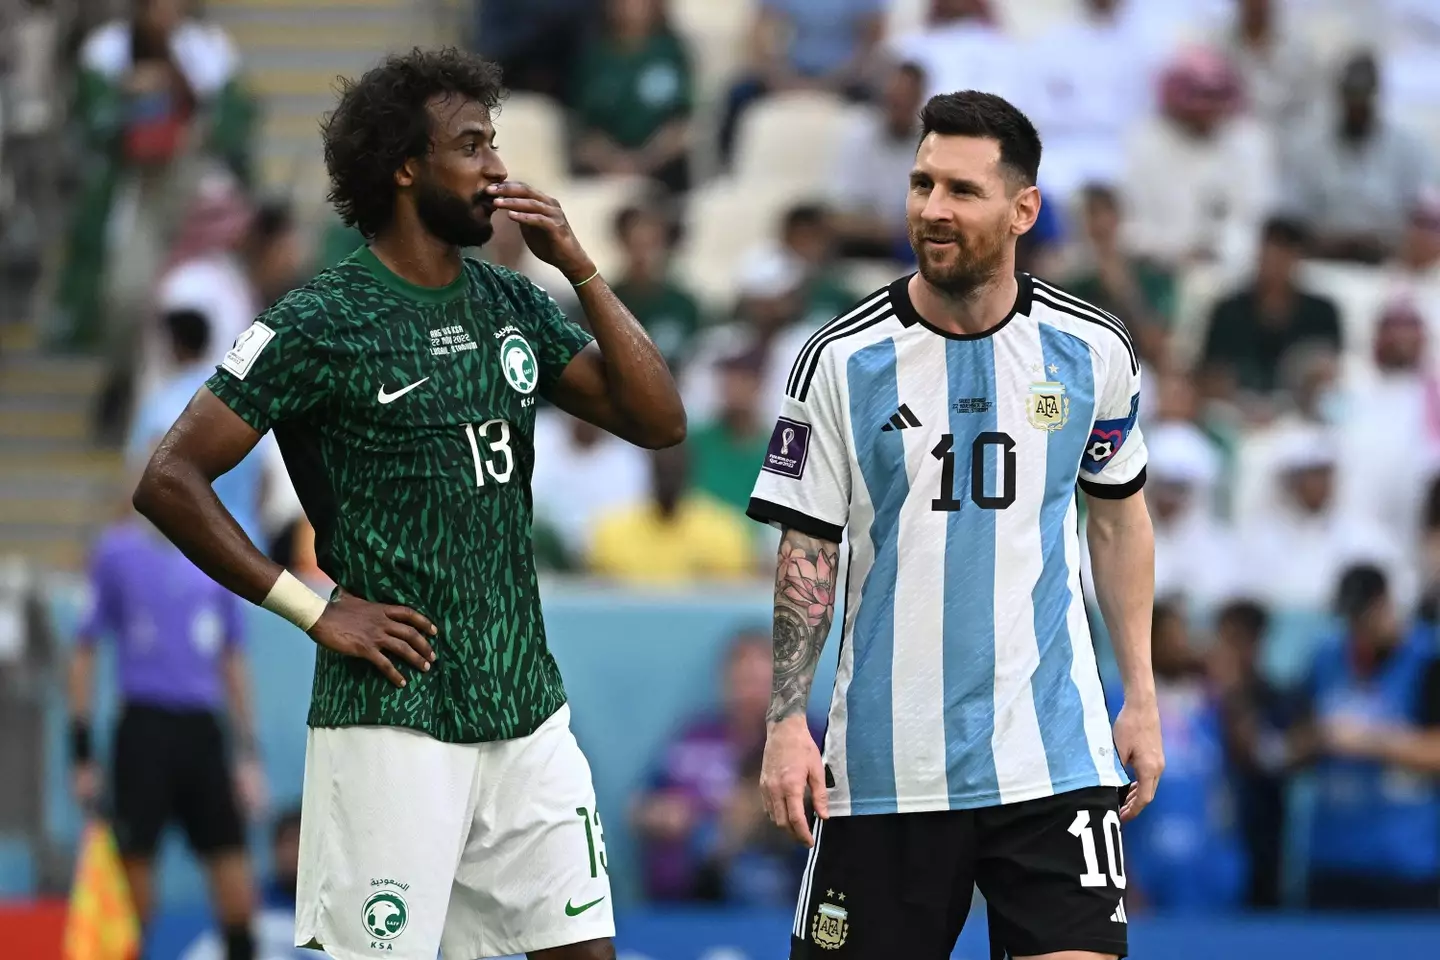 Lionel Messi watched on as Saudi Arabia mounted a sensational comeback win against Argentina in the World Cup.